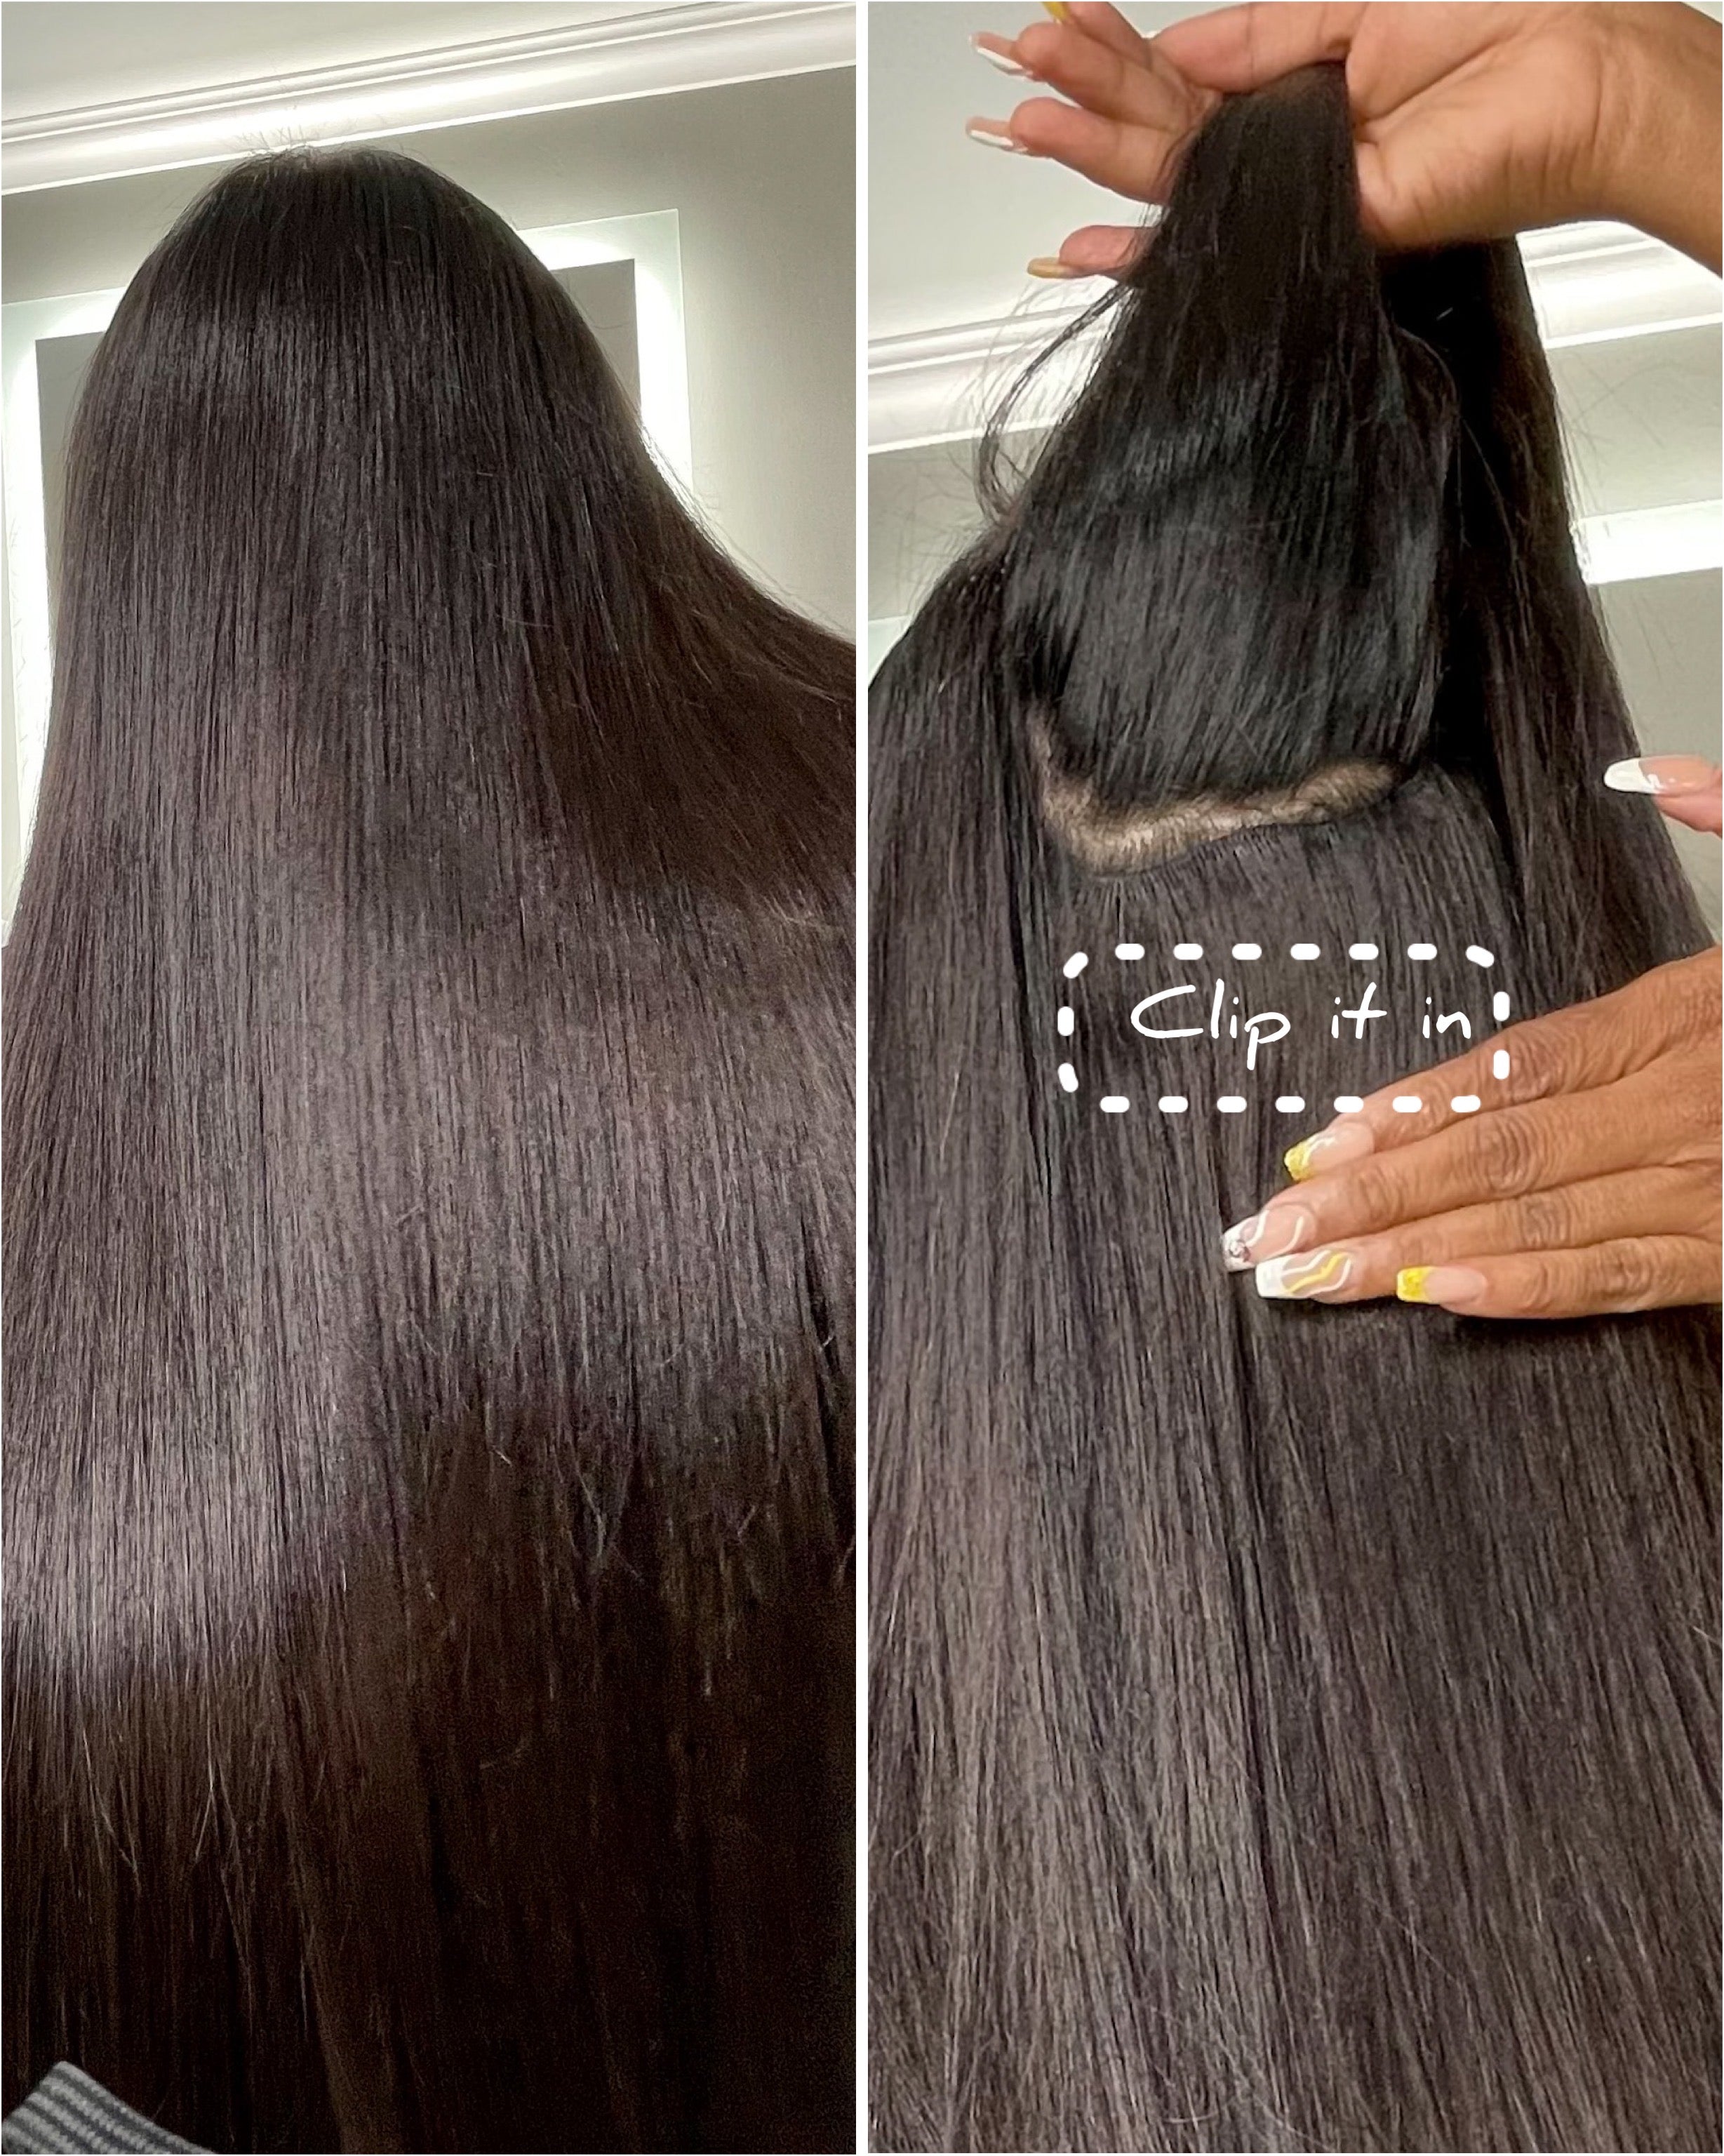 Justi’s Clip-in Extensions